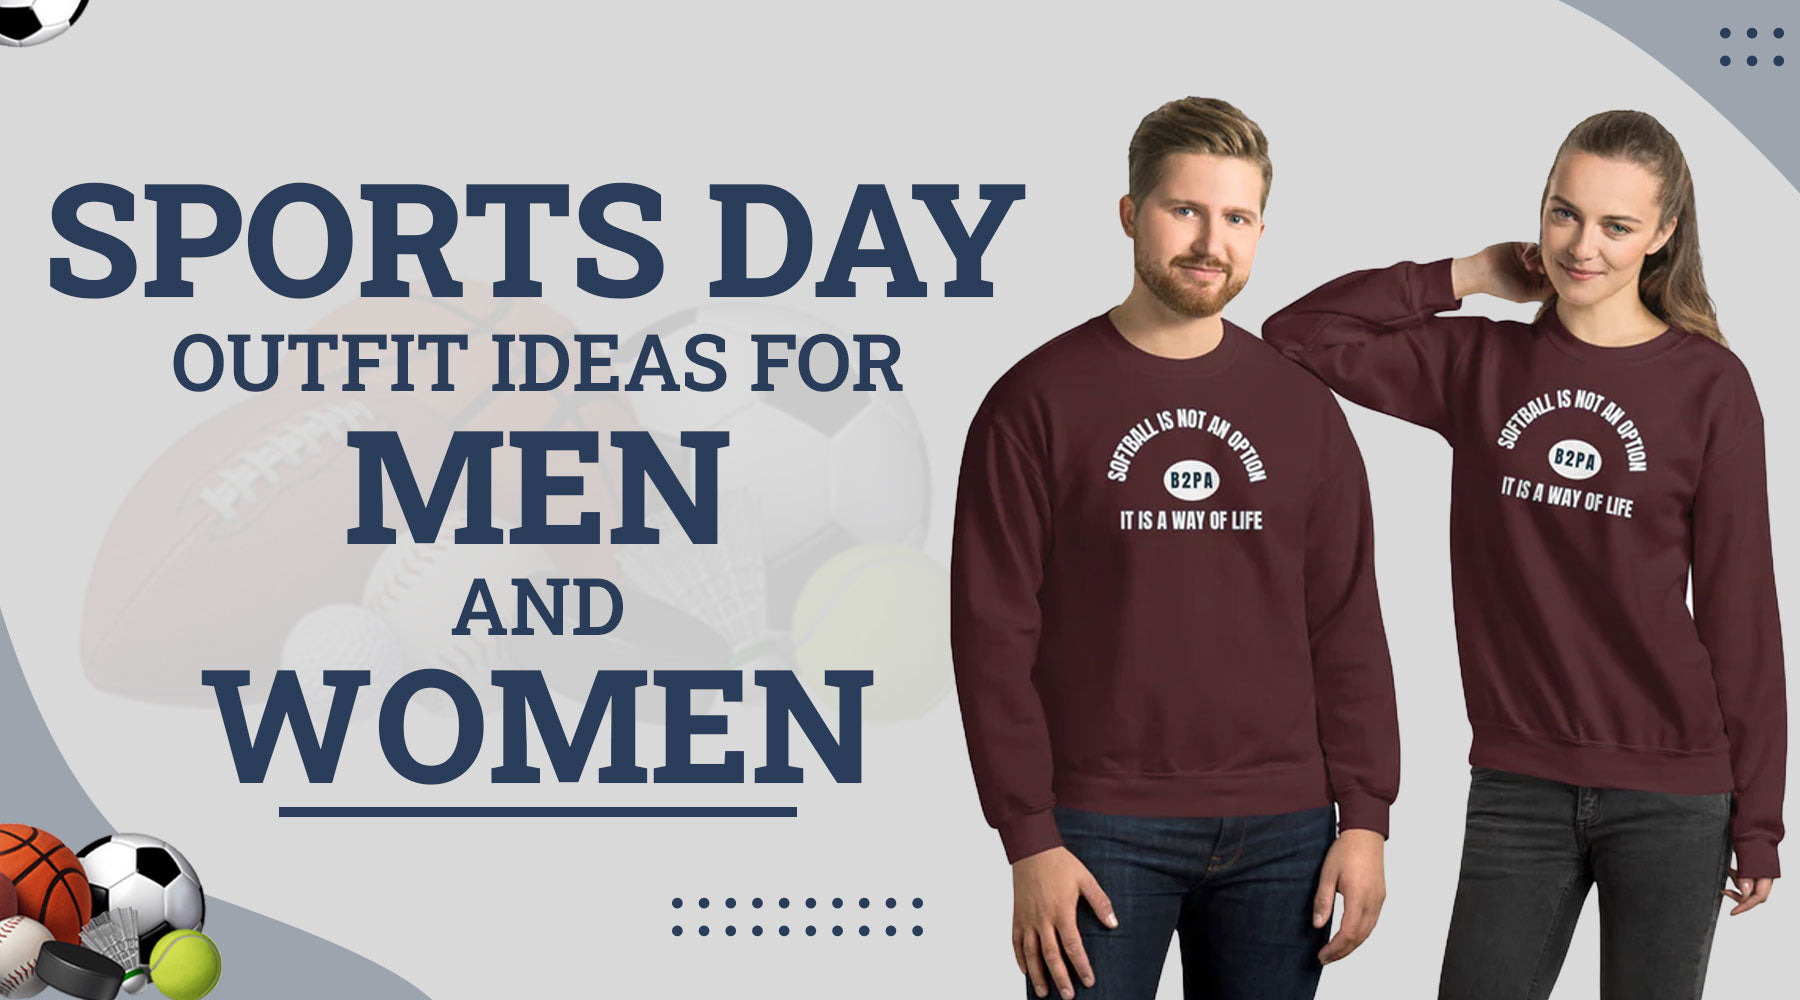 Sports Day Outfit Ideas for Men and Women